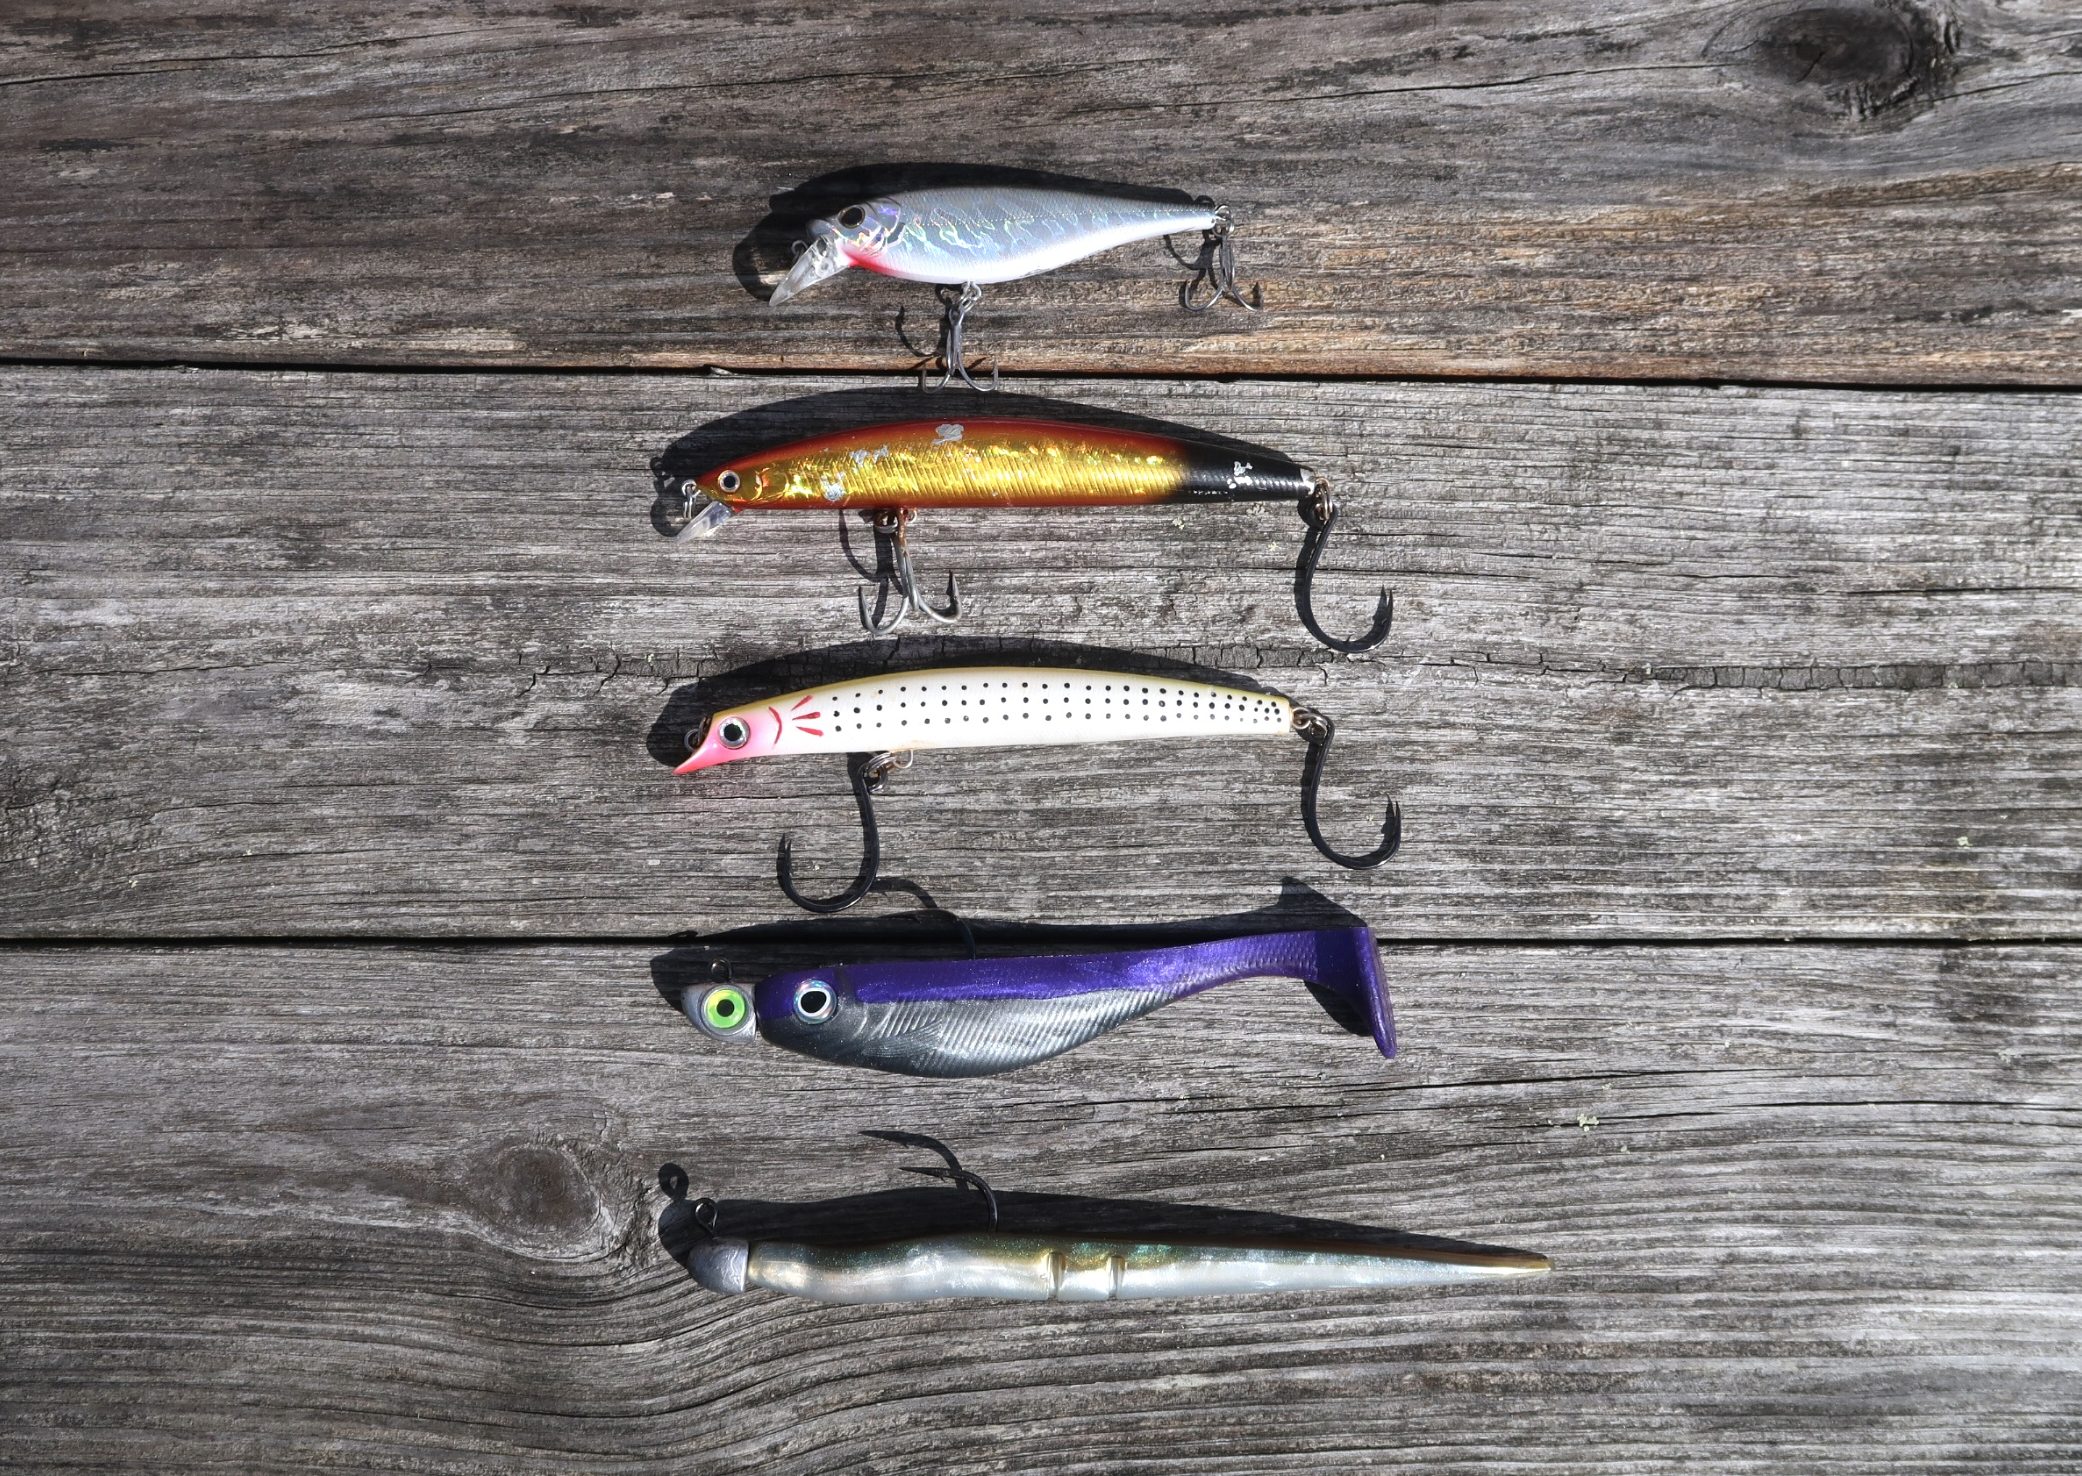 Long Casting Fishing Lures Soft Plastic Baits Bass Saltwater